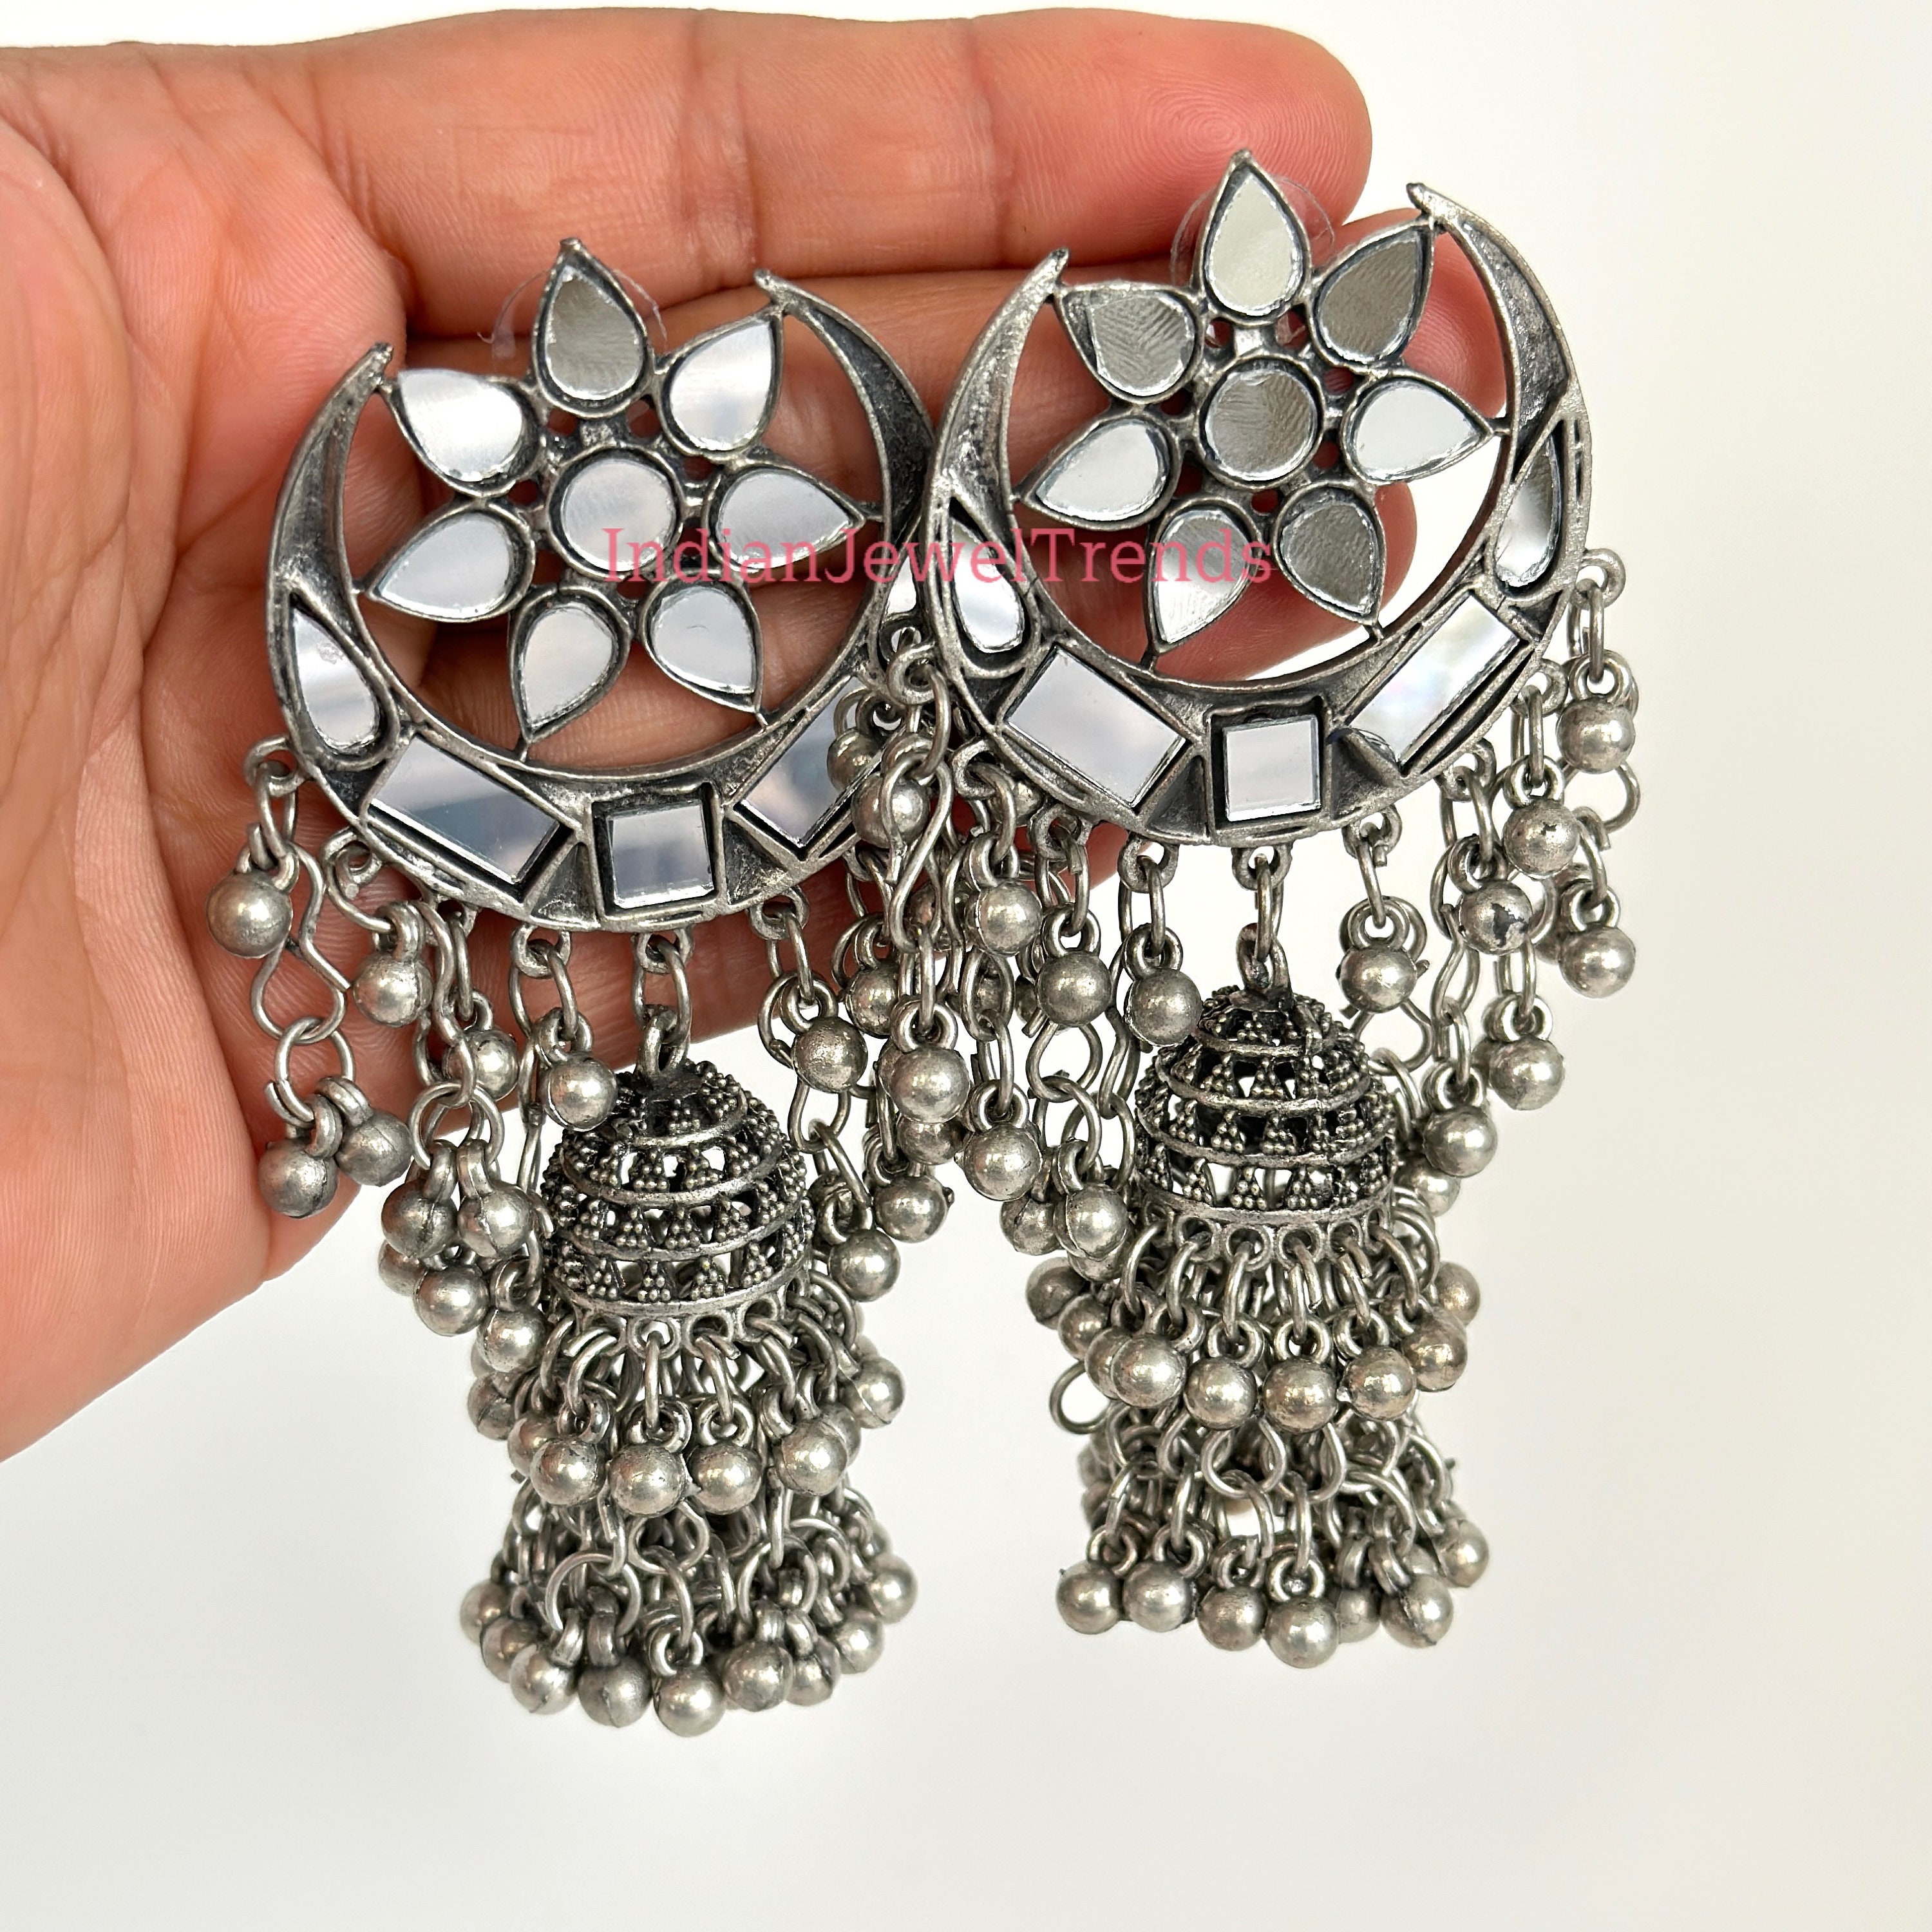 Aggregate more than 129 silver mirror earrings super hot